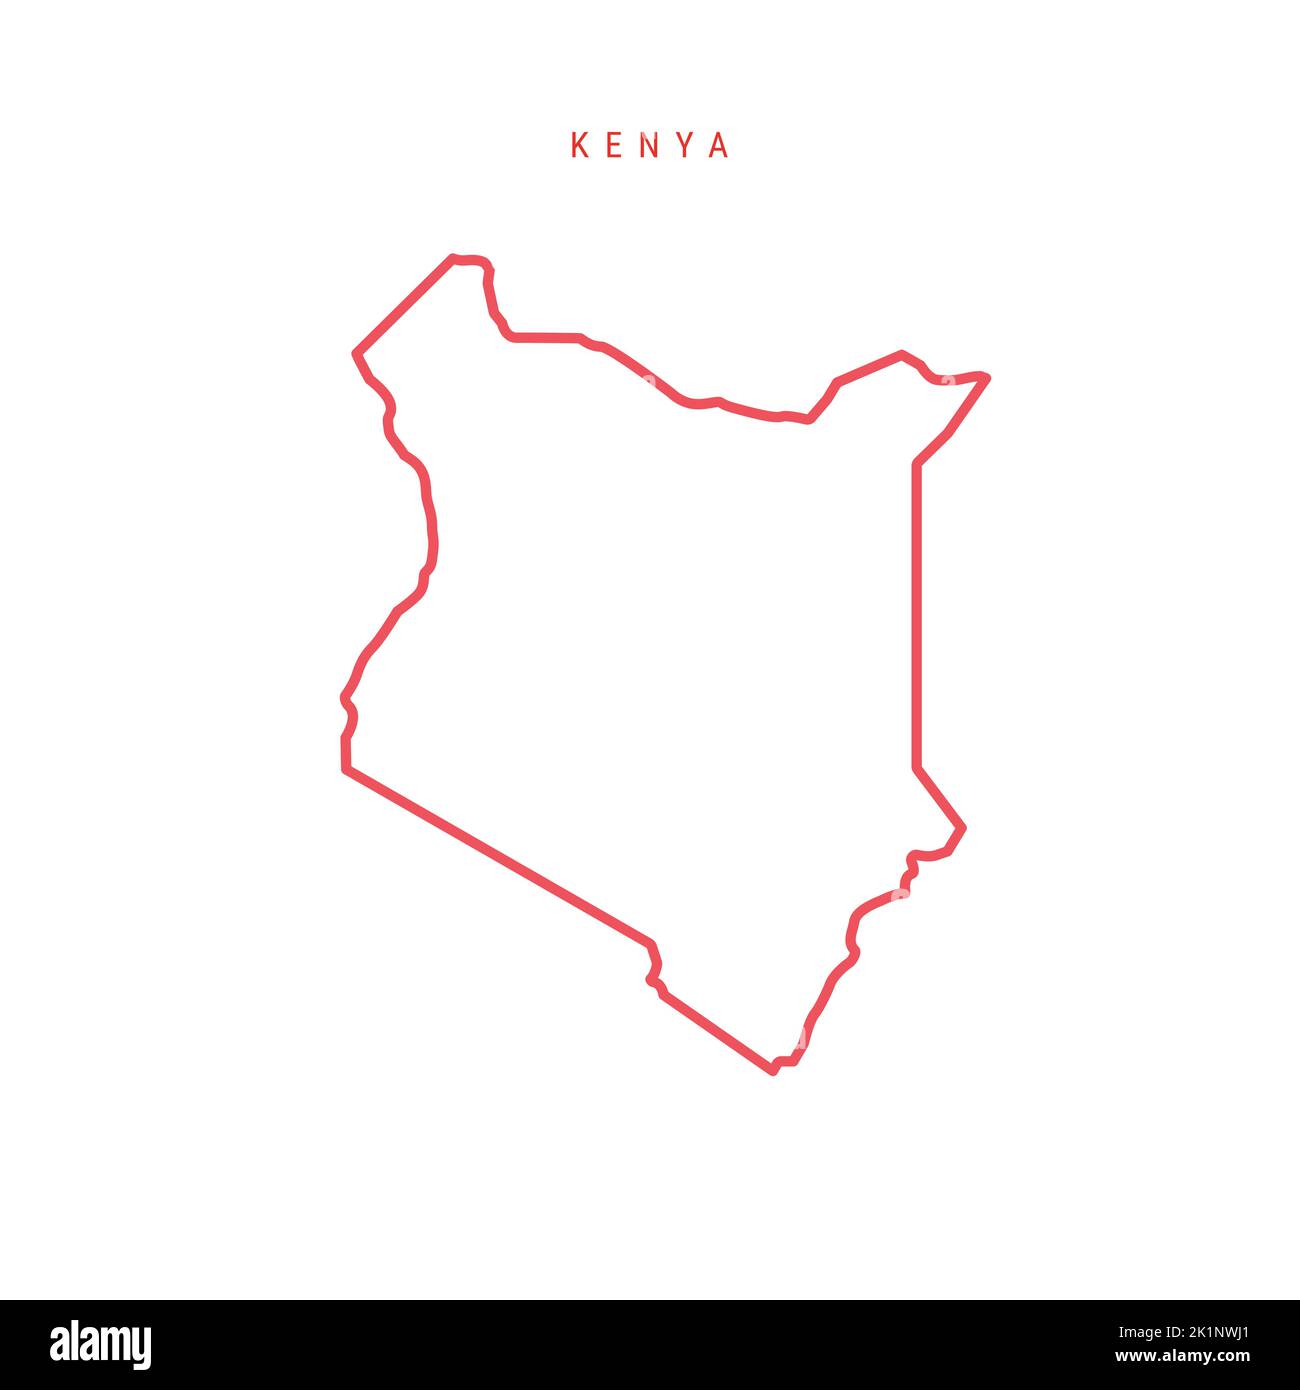 Kenya editable outline map. Kenyan red border. Country name. Adjust line weight. Change to any color. Vector illustration. Stock Vector